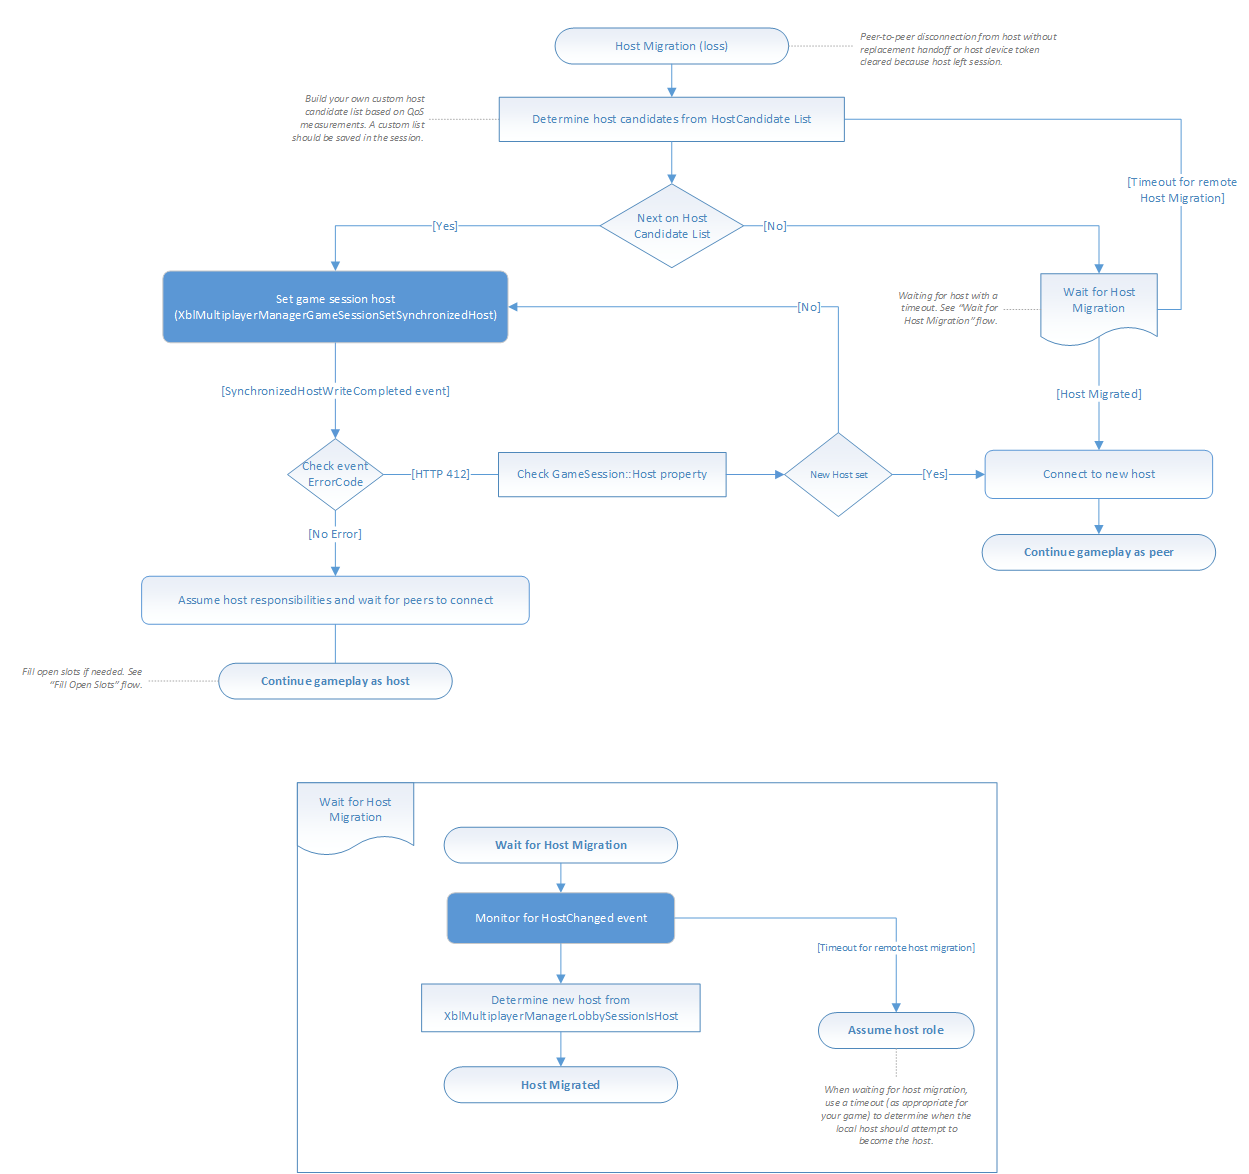 Images of SmartMatch matchmaking flowcharts that show the flow of handling a host migration when the host of a multiplayer game disconnects.